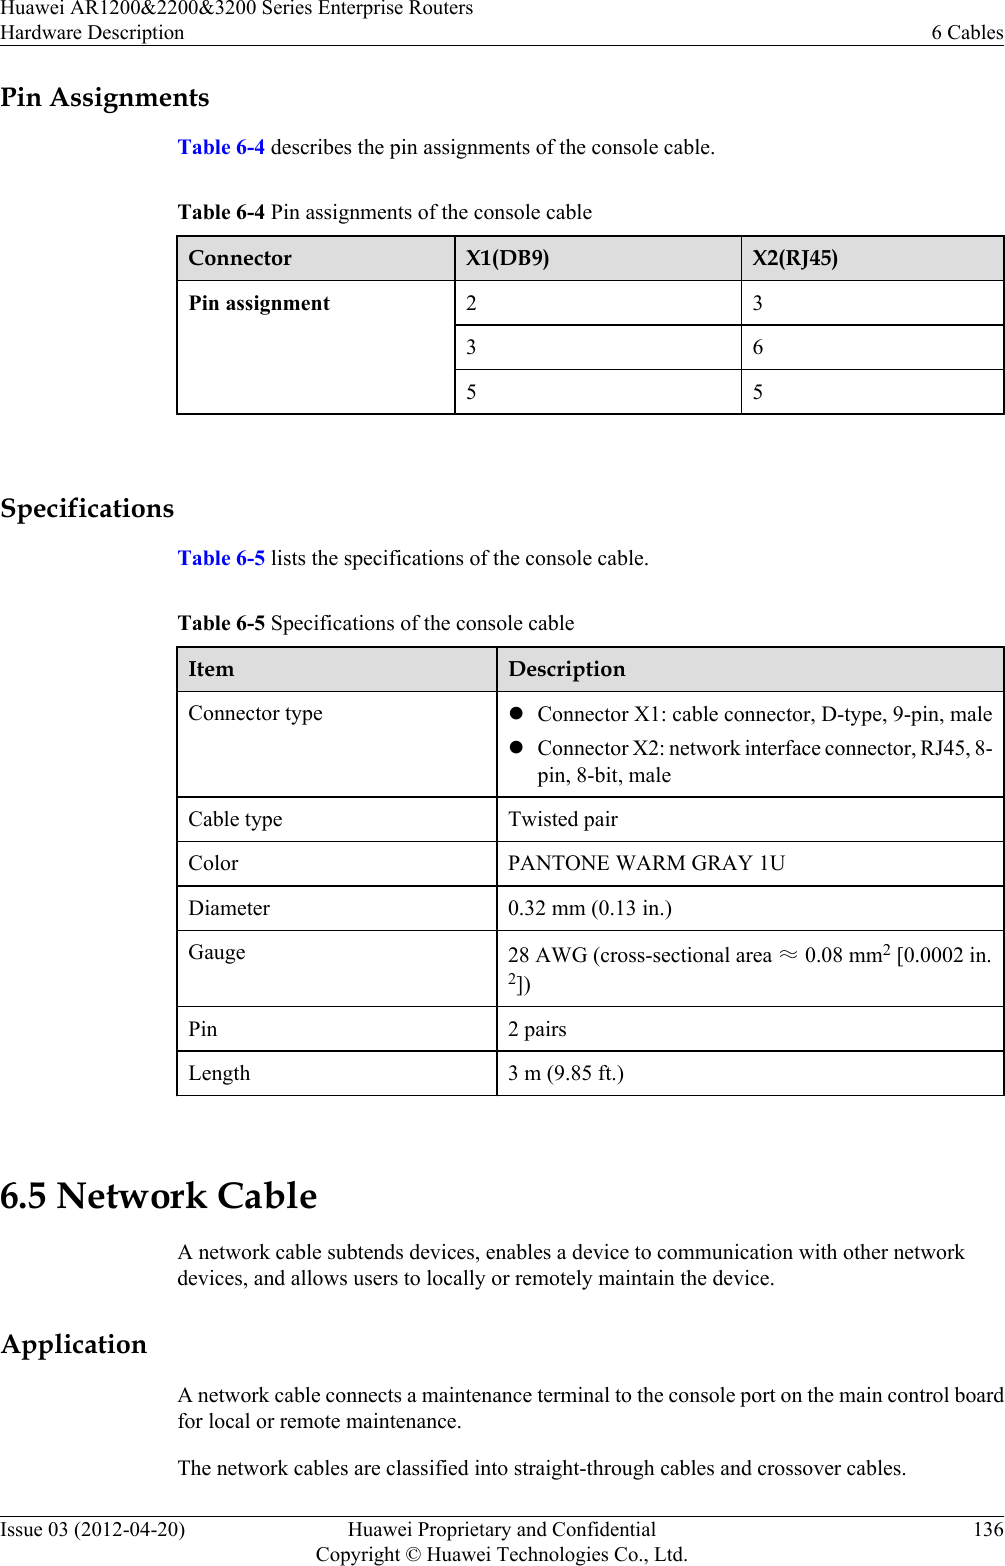 Pin AssignmentsTable 6-4 describes the pin assignments of the console cable.Table 6-4 Pin assignments of the console cableConnector X1(DB9) X2(RJ45)Pin assignment 2 33 65 5 SpecificationsTable 6-5 lists the specifications of the console cable.Table 6-5 Specifications of the console cableItem DescriptionConnector type lConnector X1: cable connector, D-type, 9-pin, malelConnector X2: network interface connector, RJ45, 8-pin, 8-bit, maleCable type Twisted pairColor PANTONE WARM GRAY 1UDiameter 0.32 mm (0.13 in.)Gauge 28 AWG (cross-sectional area ≈ 0.08 mm2 [0.0002 in.2])Pin 2 pairsLength 3 m (9.85 ft.) 6.5 Network CableA network cable subtends devices, enables a device to communication with other networkdevices, and allows users to locally or remotely maintain the device.ApplicationA network cable connects a maintenance terminal to the console port on the main control boardfor local or remote maintenance.The network cables are classified into straight-through cables and crossover cables.Huawei AR1200&amp;2200&amp;3200 Series Enterprise RoutersHardware Description 6 CablesIssue 03 (2012-04-20) Huawei Proprietary and ConfidentialCopyright © Huawei Technologies Co., Ltd.136